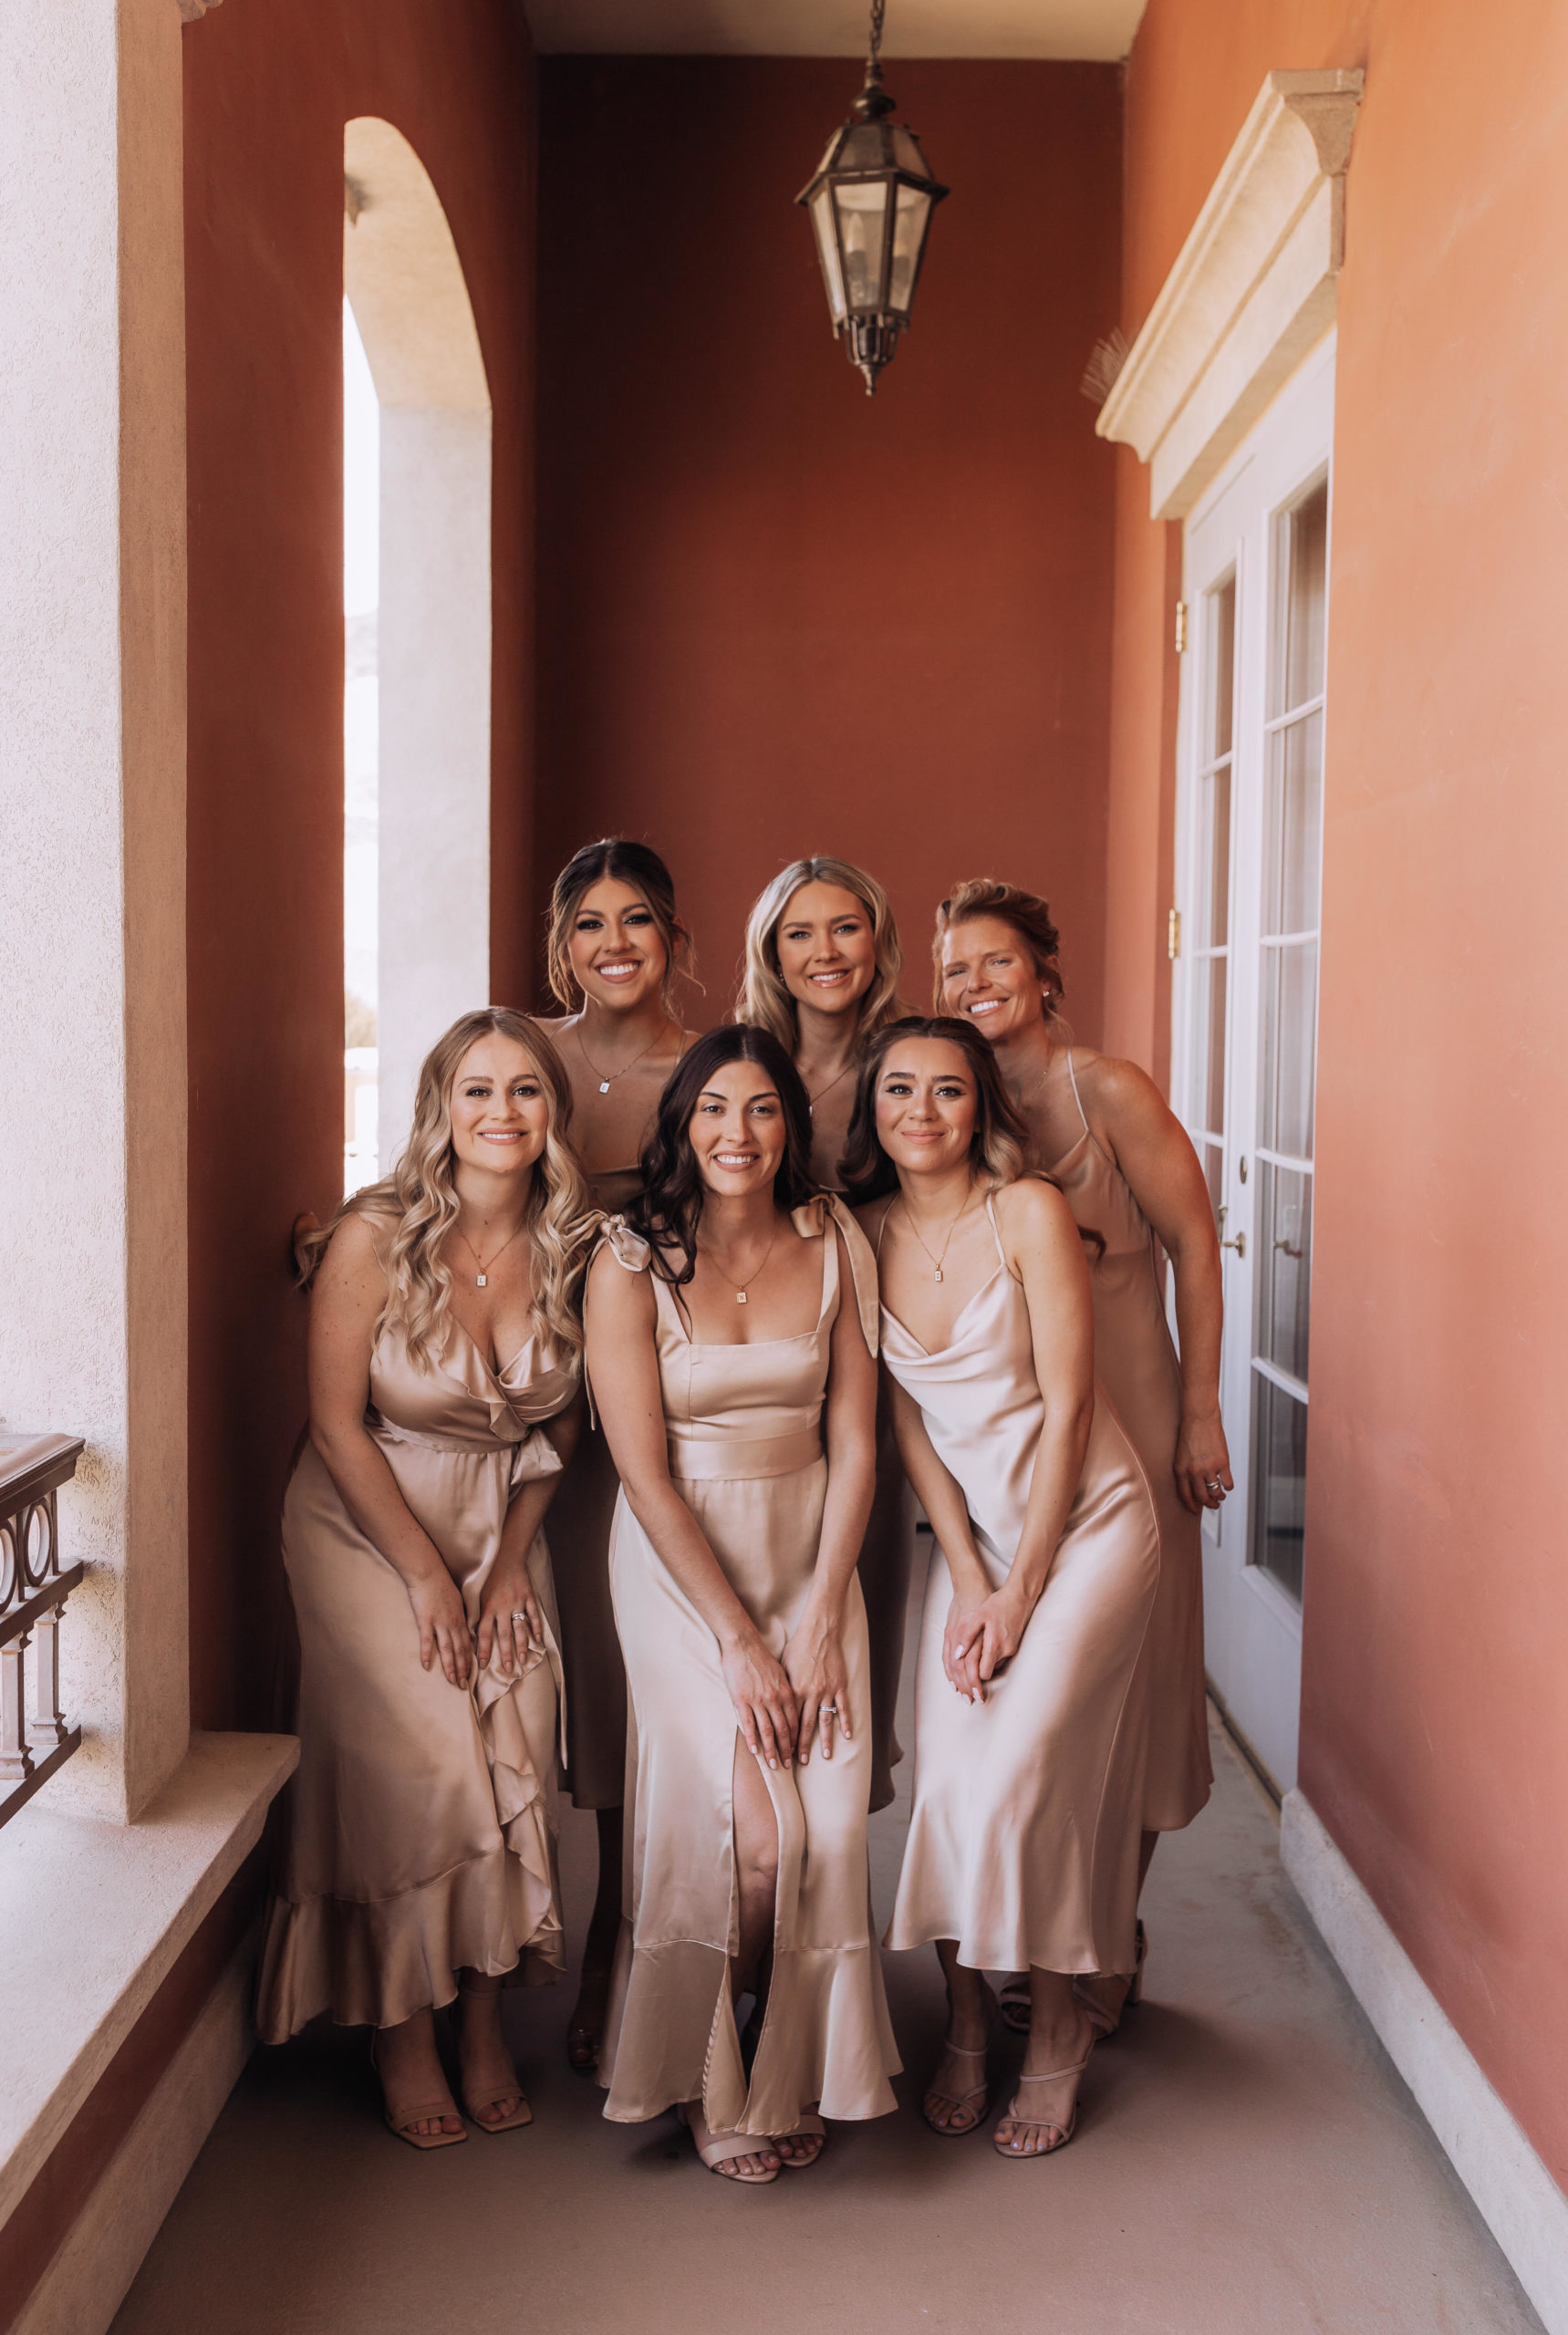 All of the bridesmaid standing on the patio of the suit waiting for the brides dress reveal 